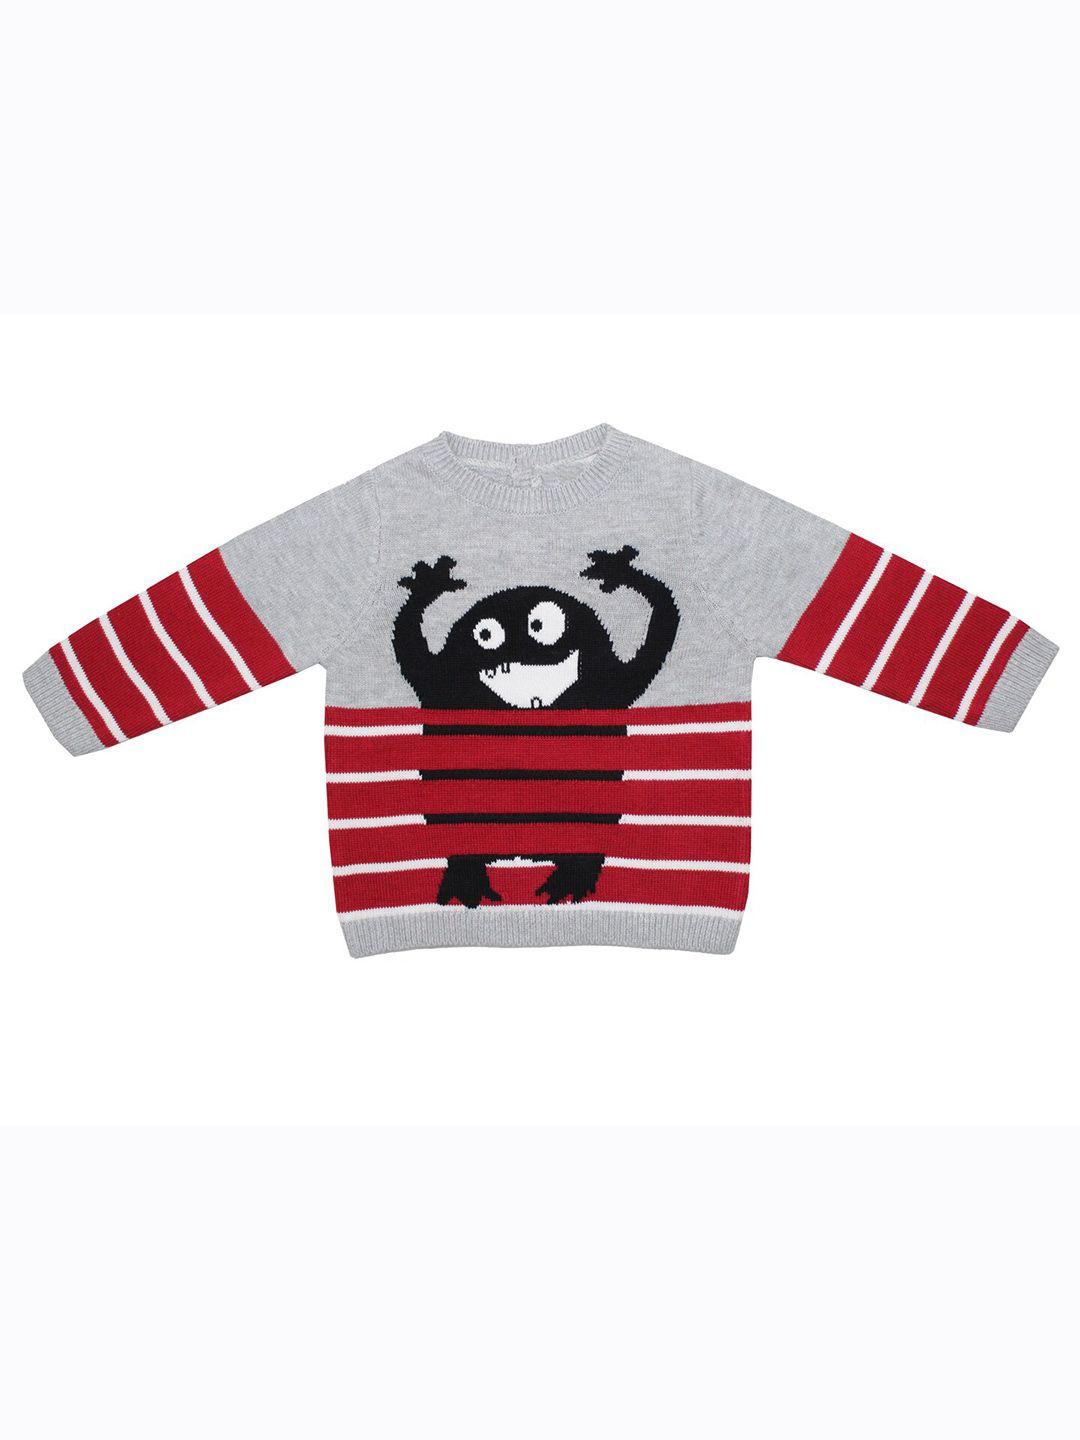 jwaaq-boys-grey-&-red-typography-printed-pullover